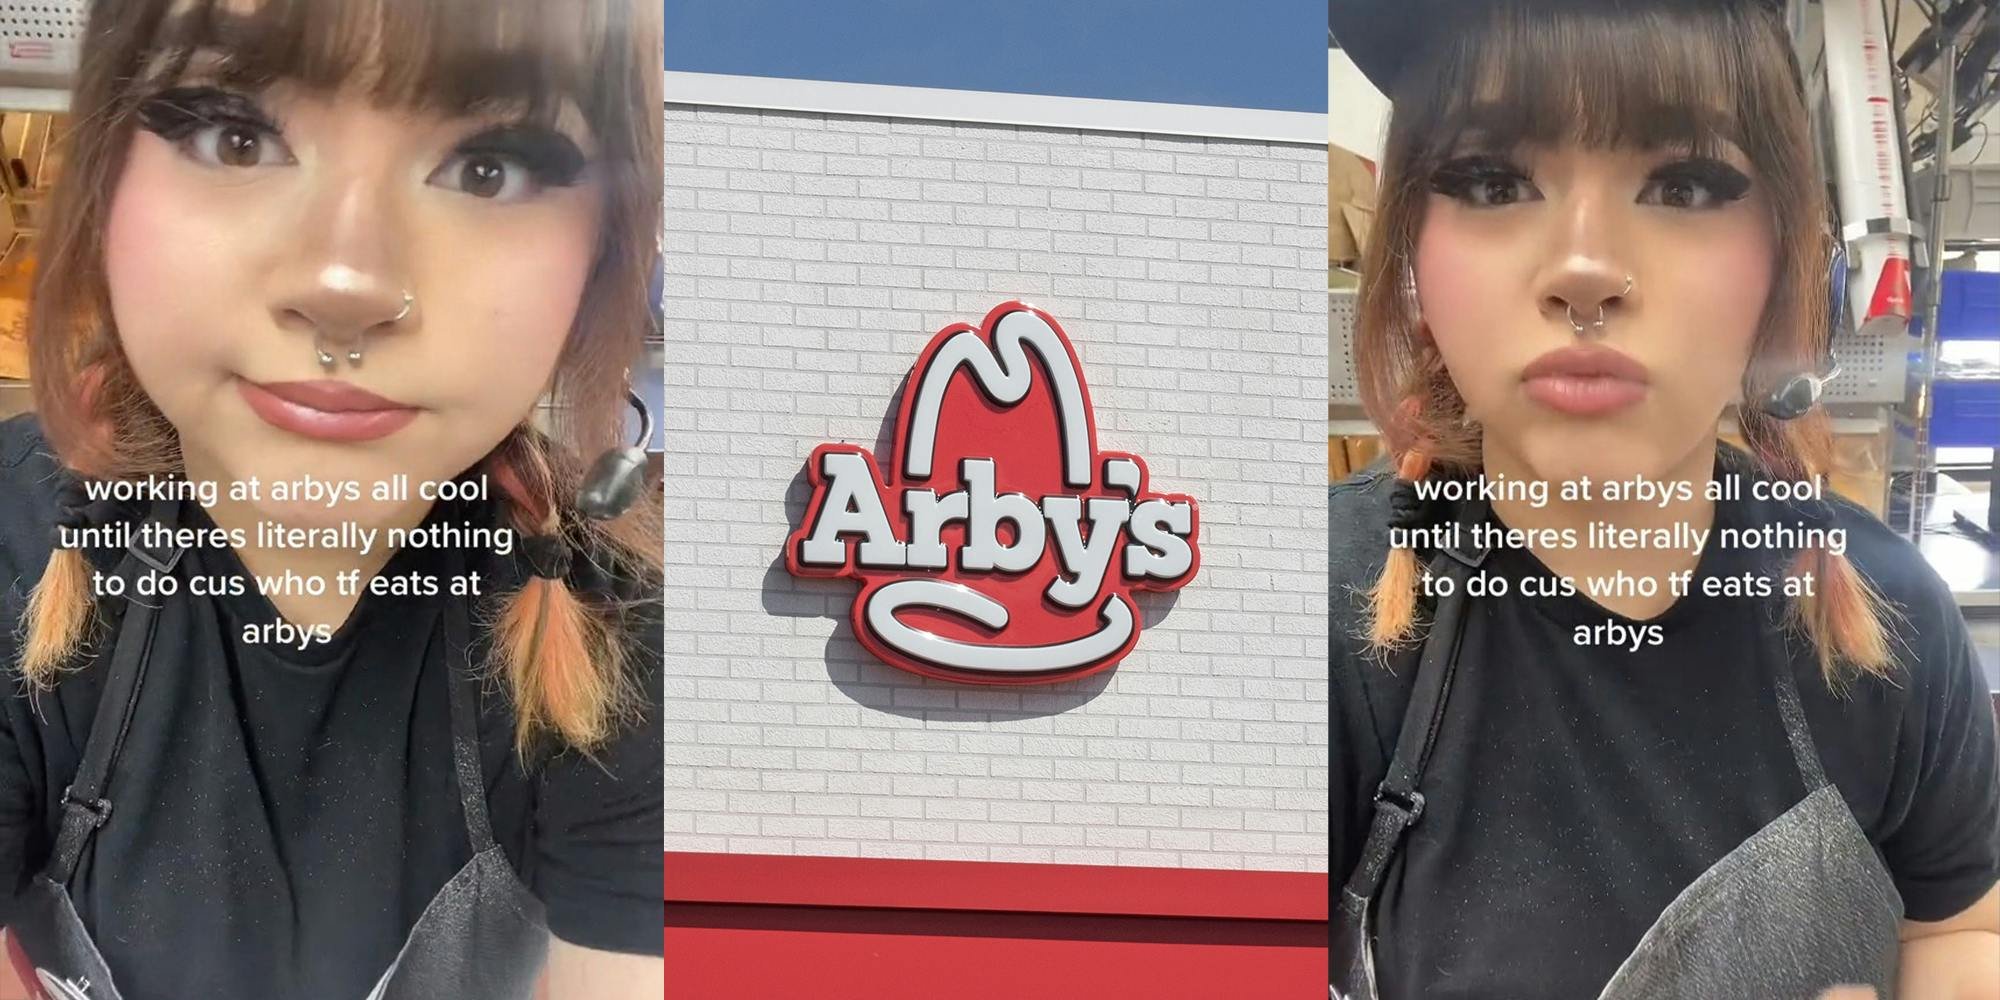 ‘Don’t tempt me to apply’: Arby’s worker says she’s always bored because ‘who TF eats at Arby’s’